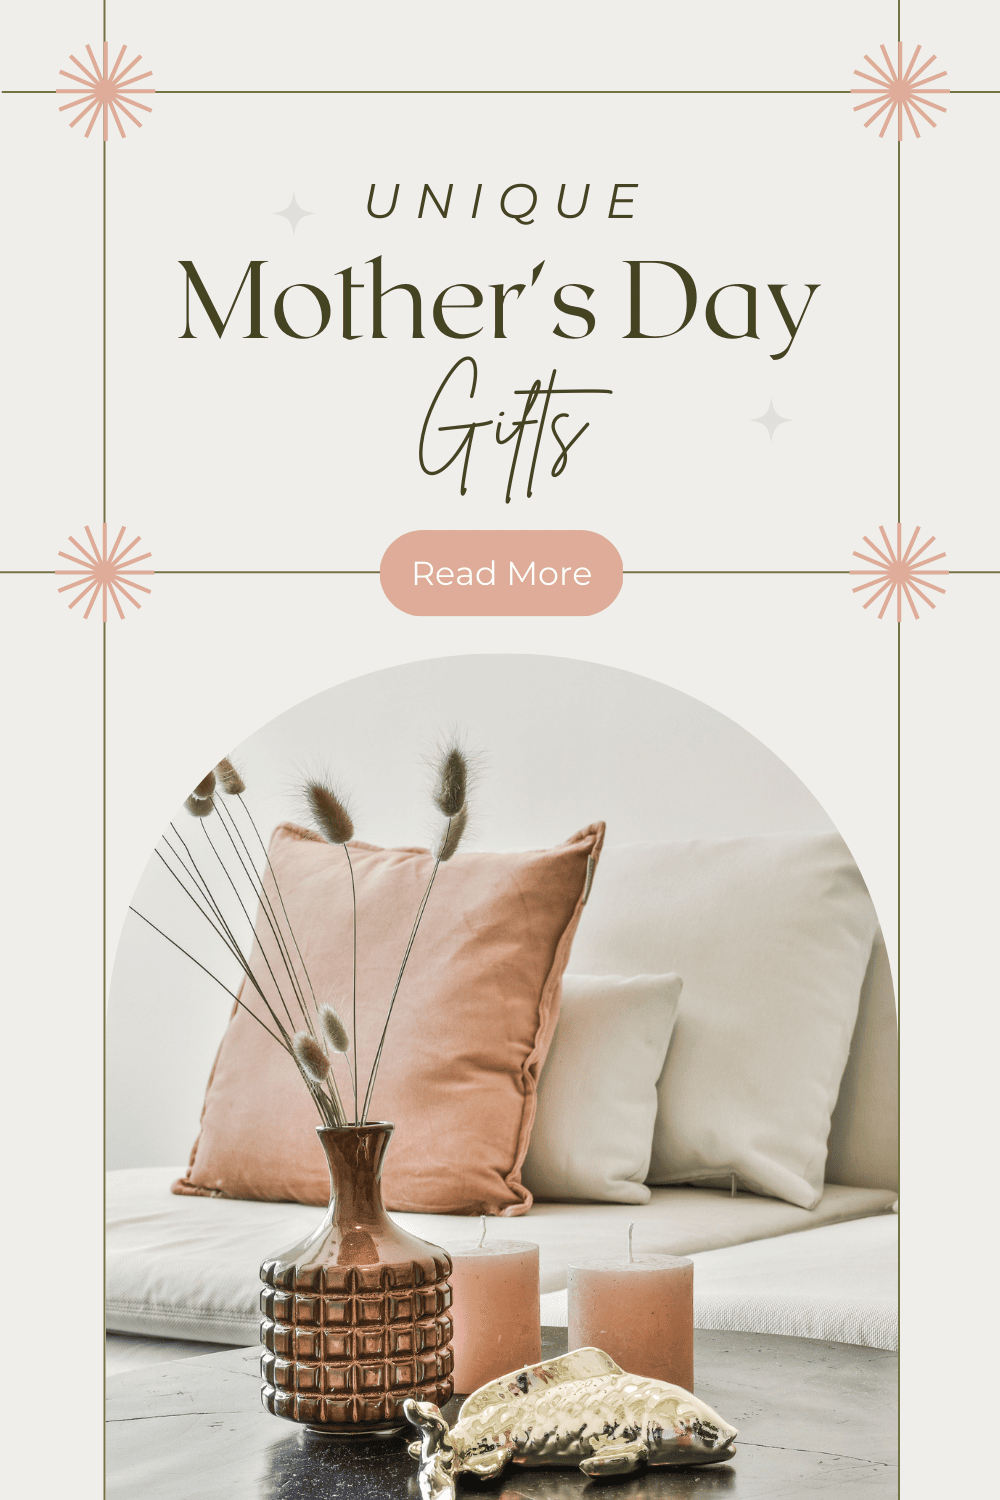 Unique mother's day gifts.